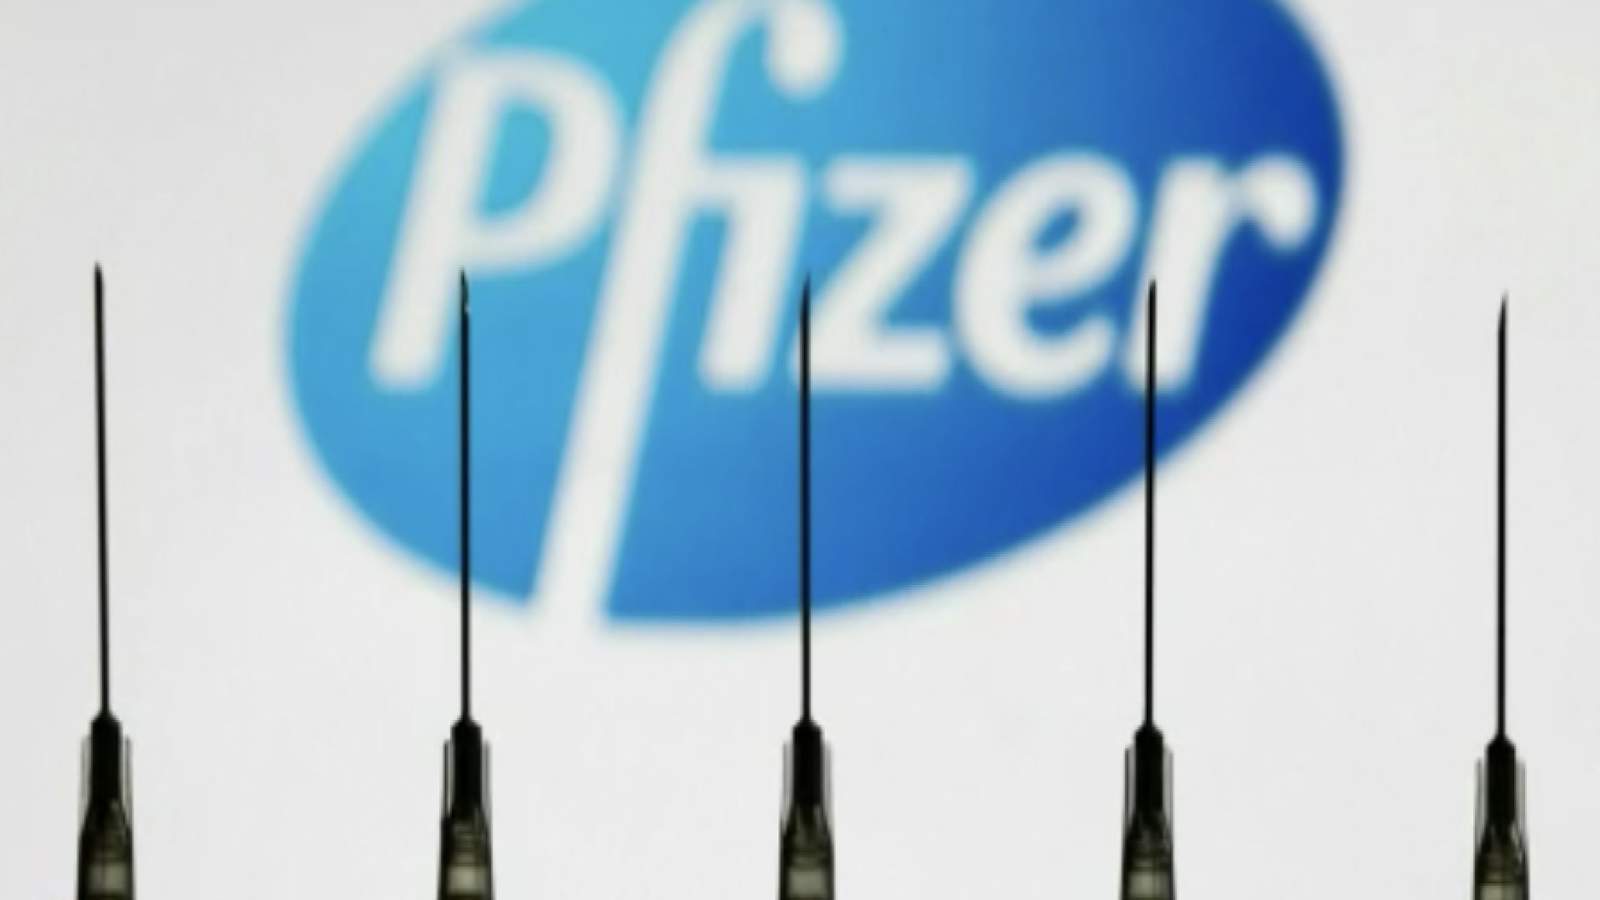 Pfizer testing third dose as booster shot, but medical expert says its too soon to consider